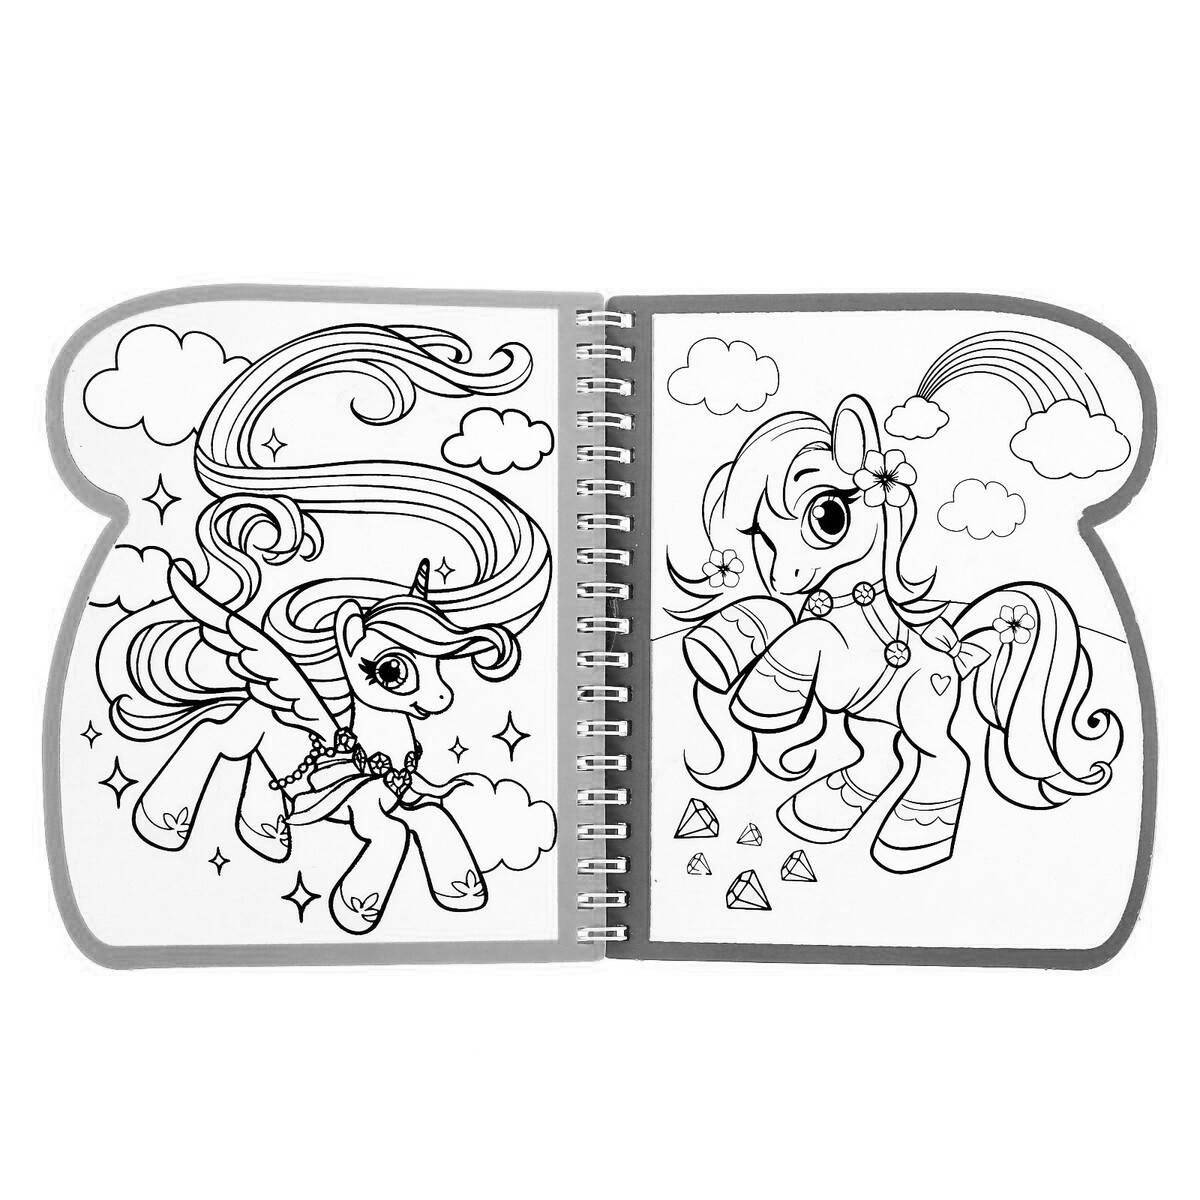 Color-frenzy coloring page reusable album